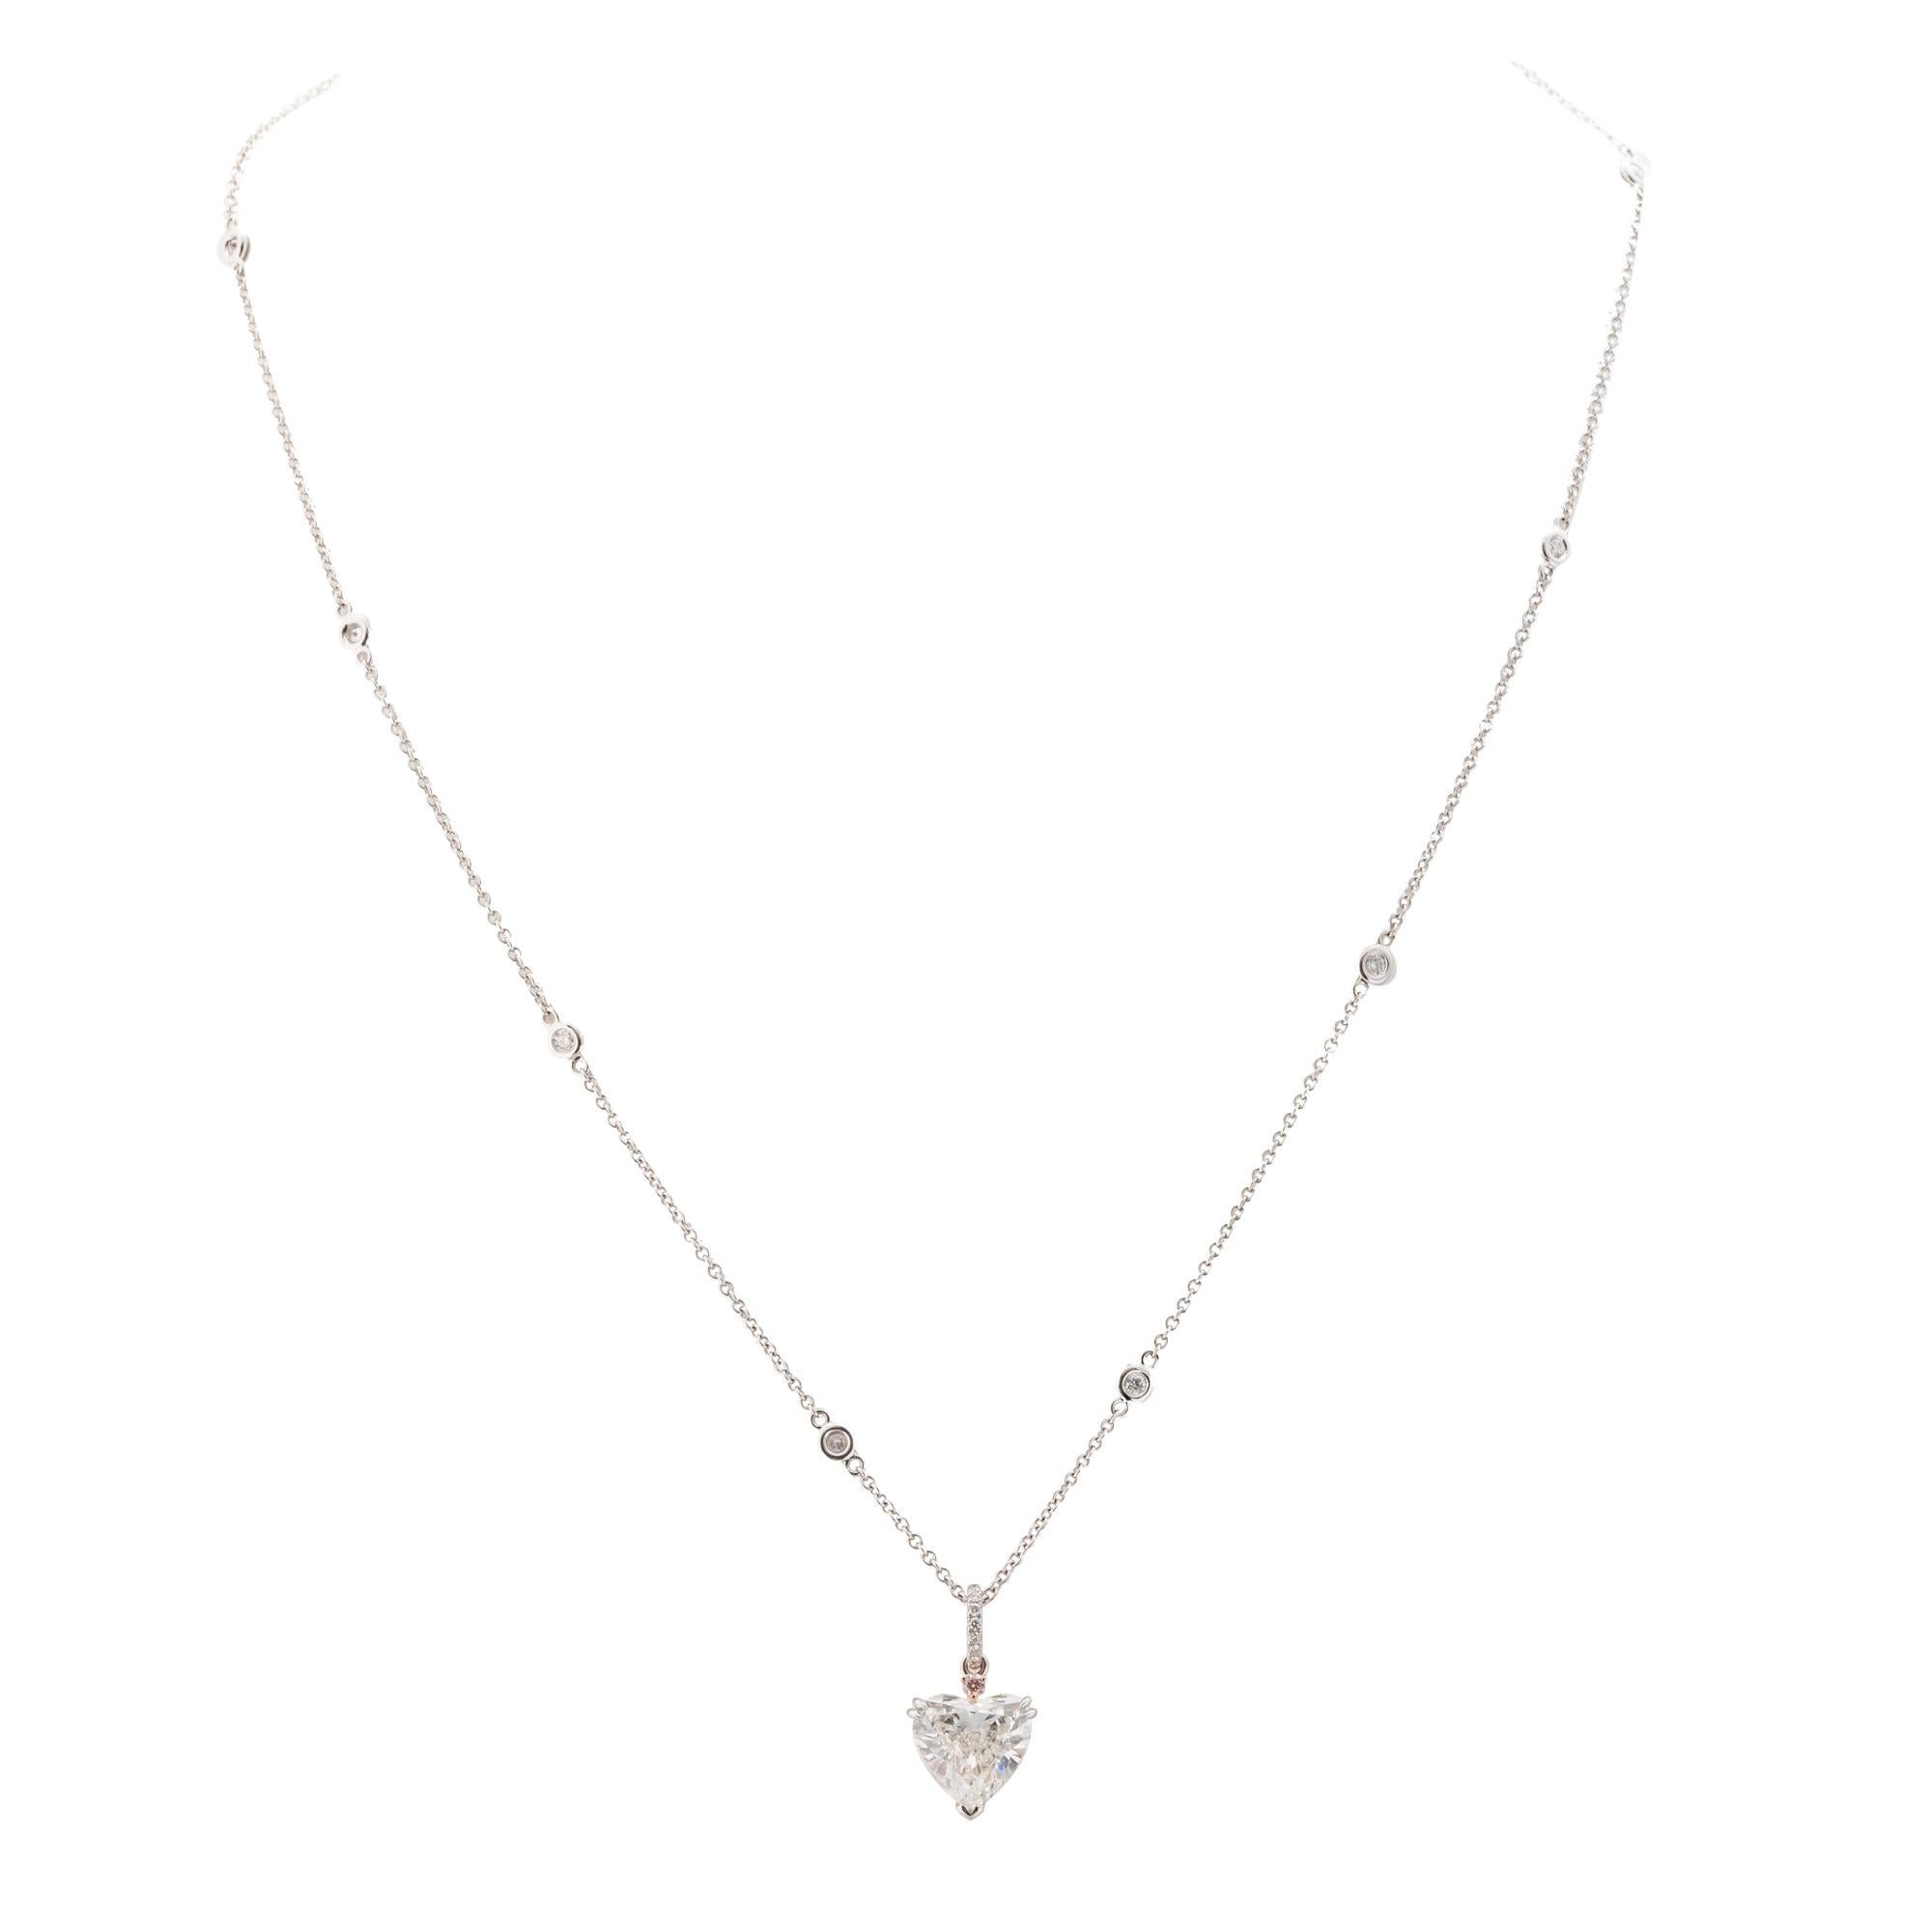 18 karat white and rose gold pendant consisting of one heart shaped diamond weighing 3.00 carats accented with two round pink diamonds one  weighing .02 carats and one weighing .03 carats. Round brilliant cut diamonds accent the bail and chain with